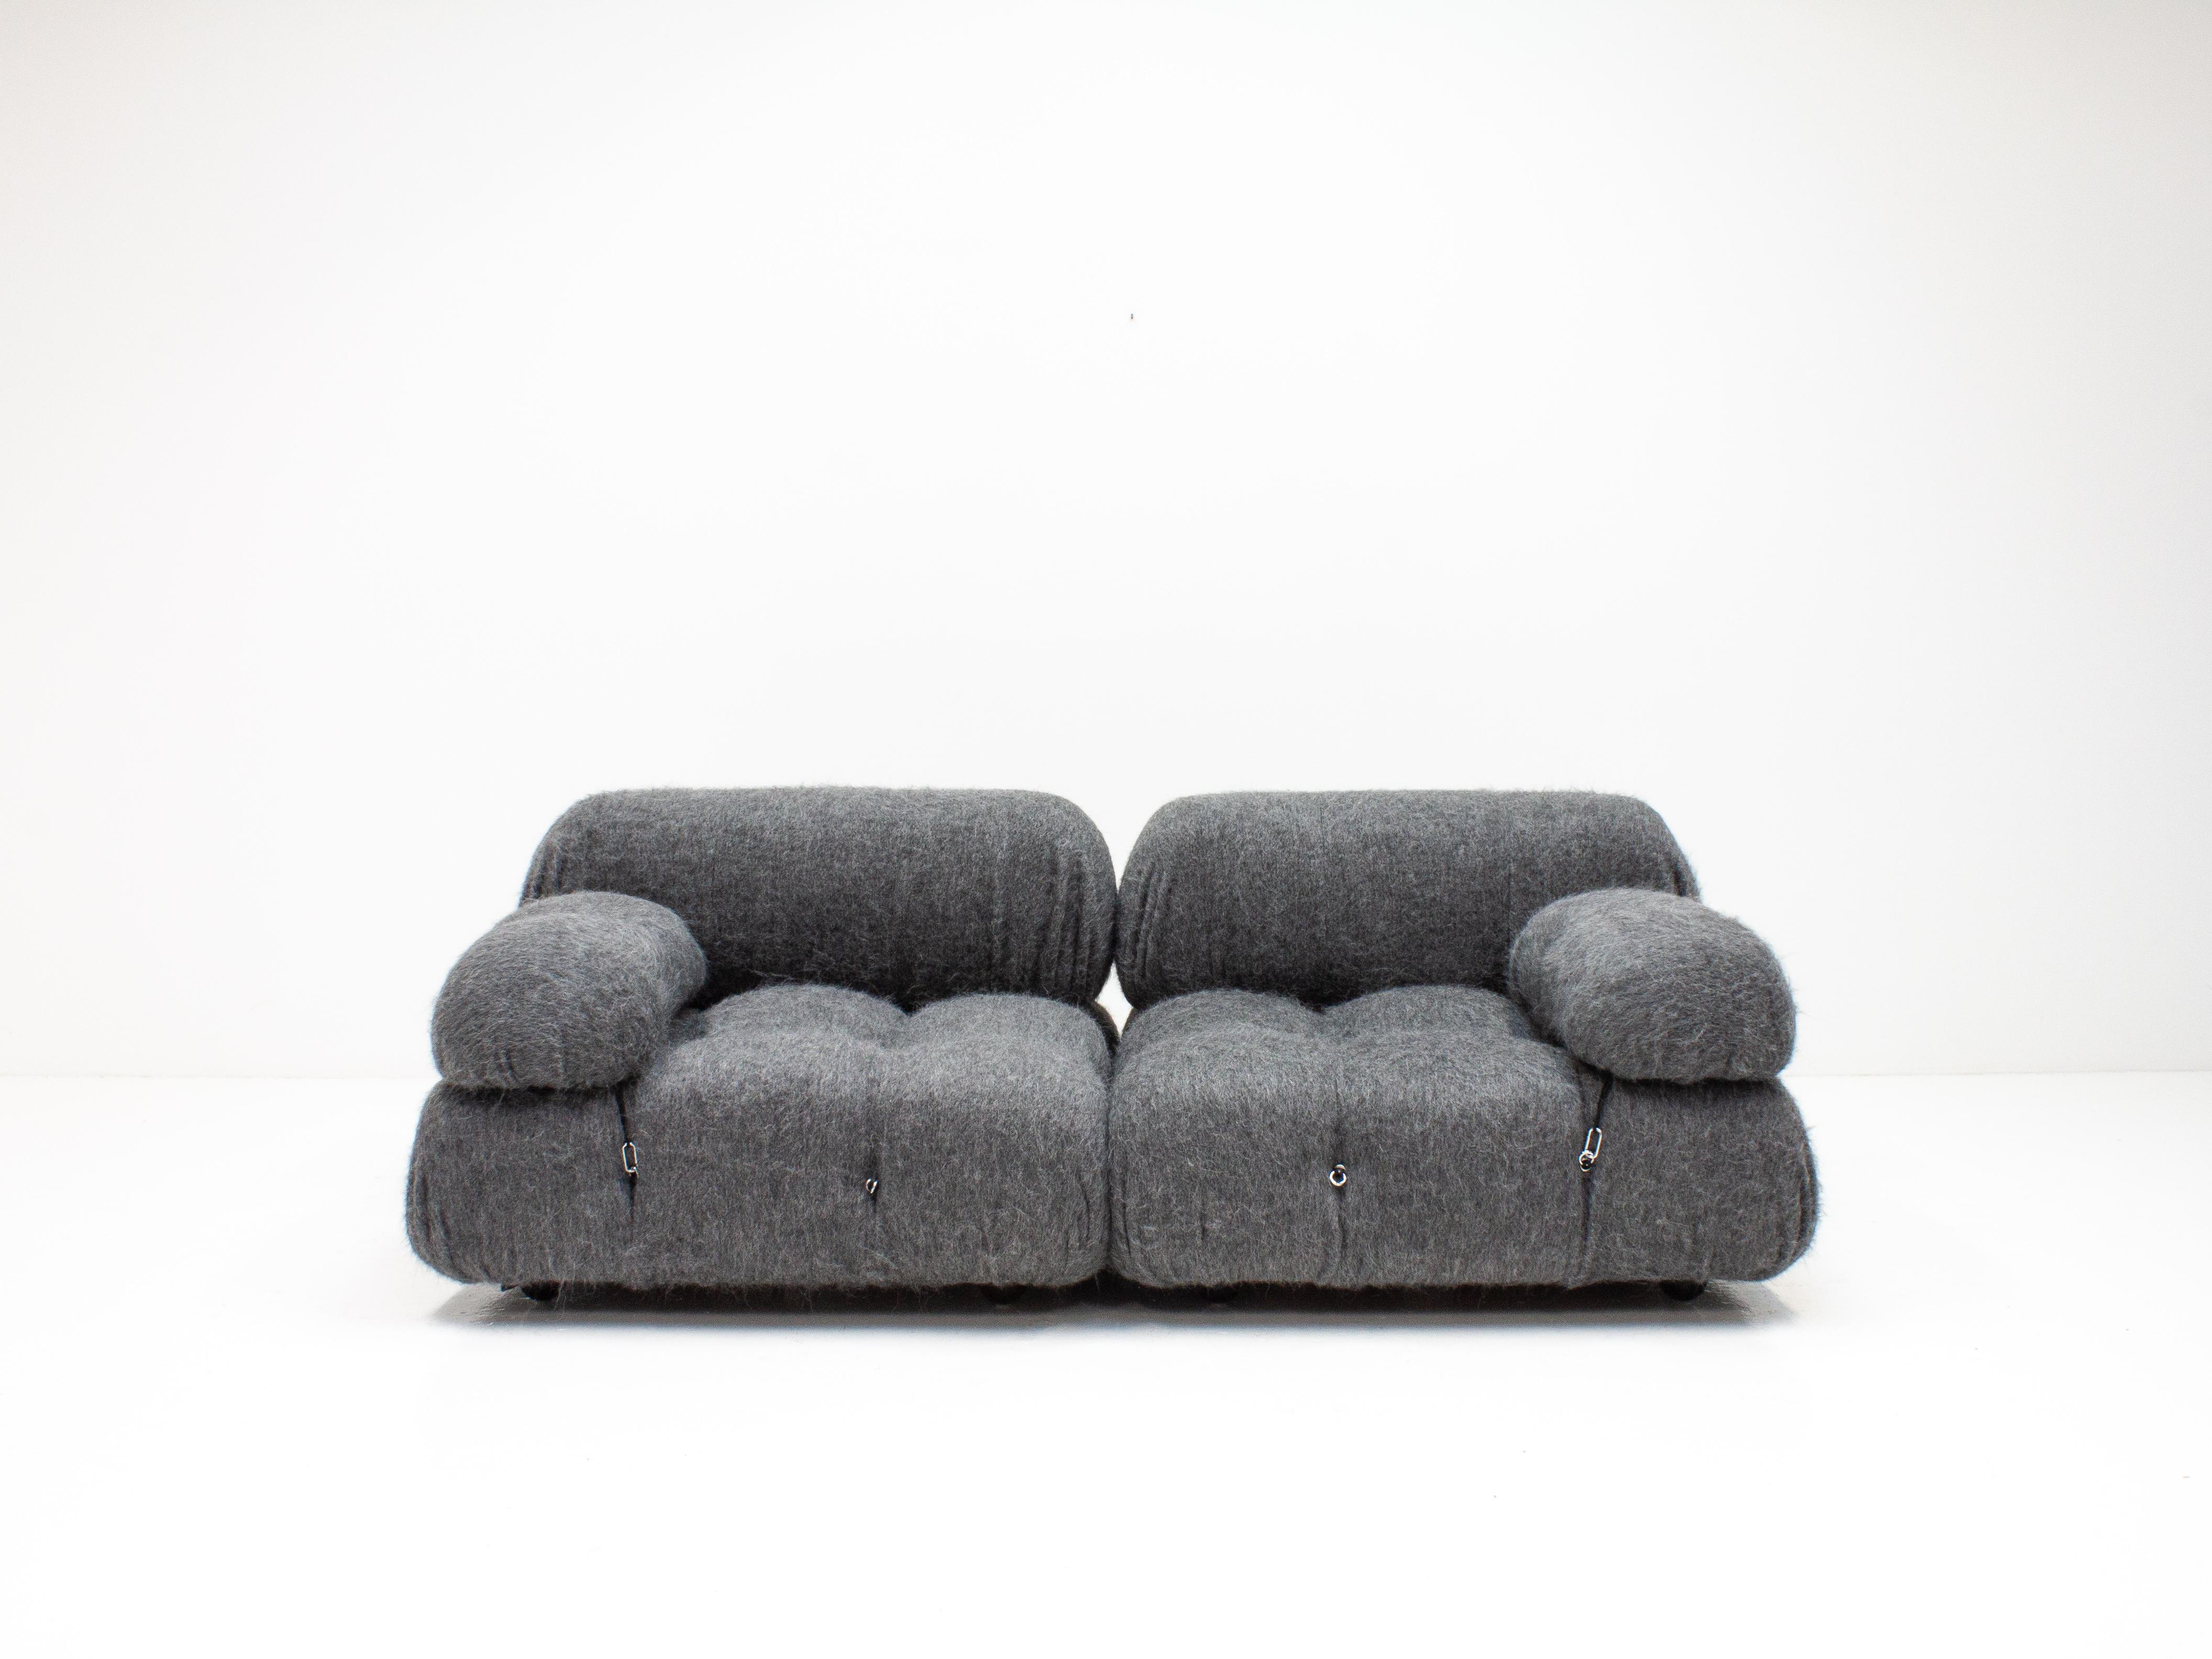 A Mario Bellini 'Camaleonda' modular sofa for B&B Italia, newly upholstered in fluffy wool, mohair and alpaca fabric which is produced by one of the most luxurious fabric manufacturers in the world, Pierre Frey.

The Camaleonda was designed by Mario